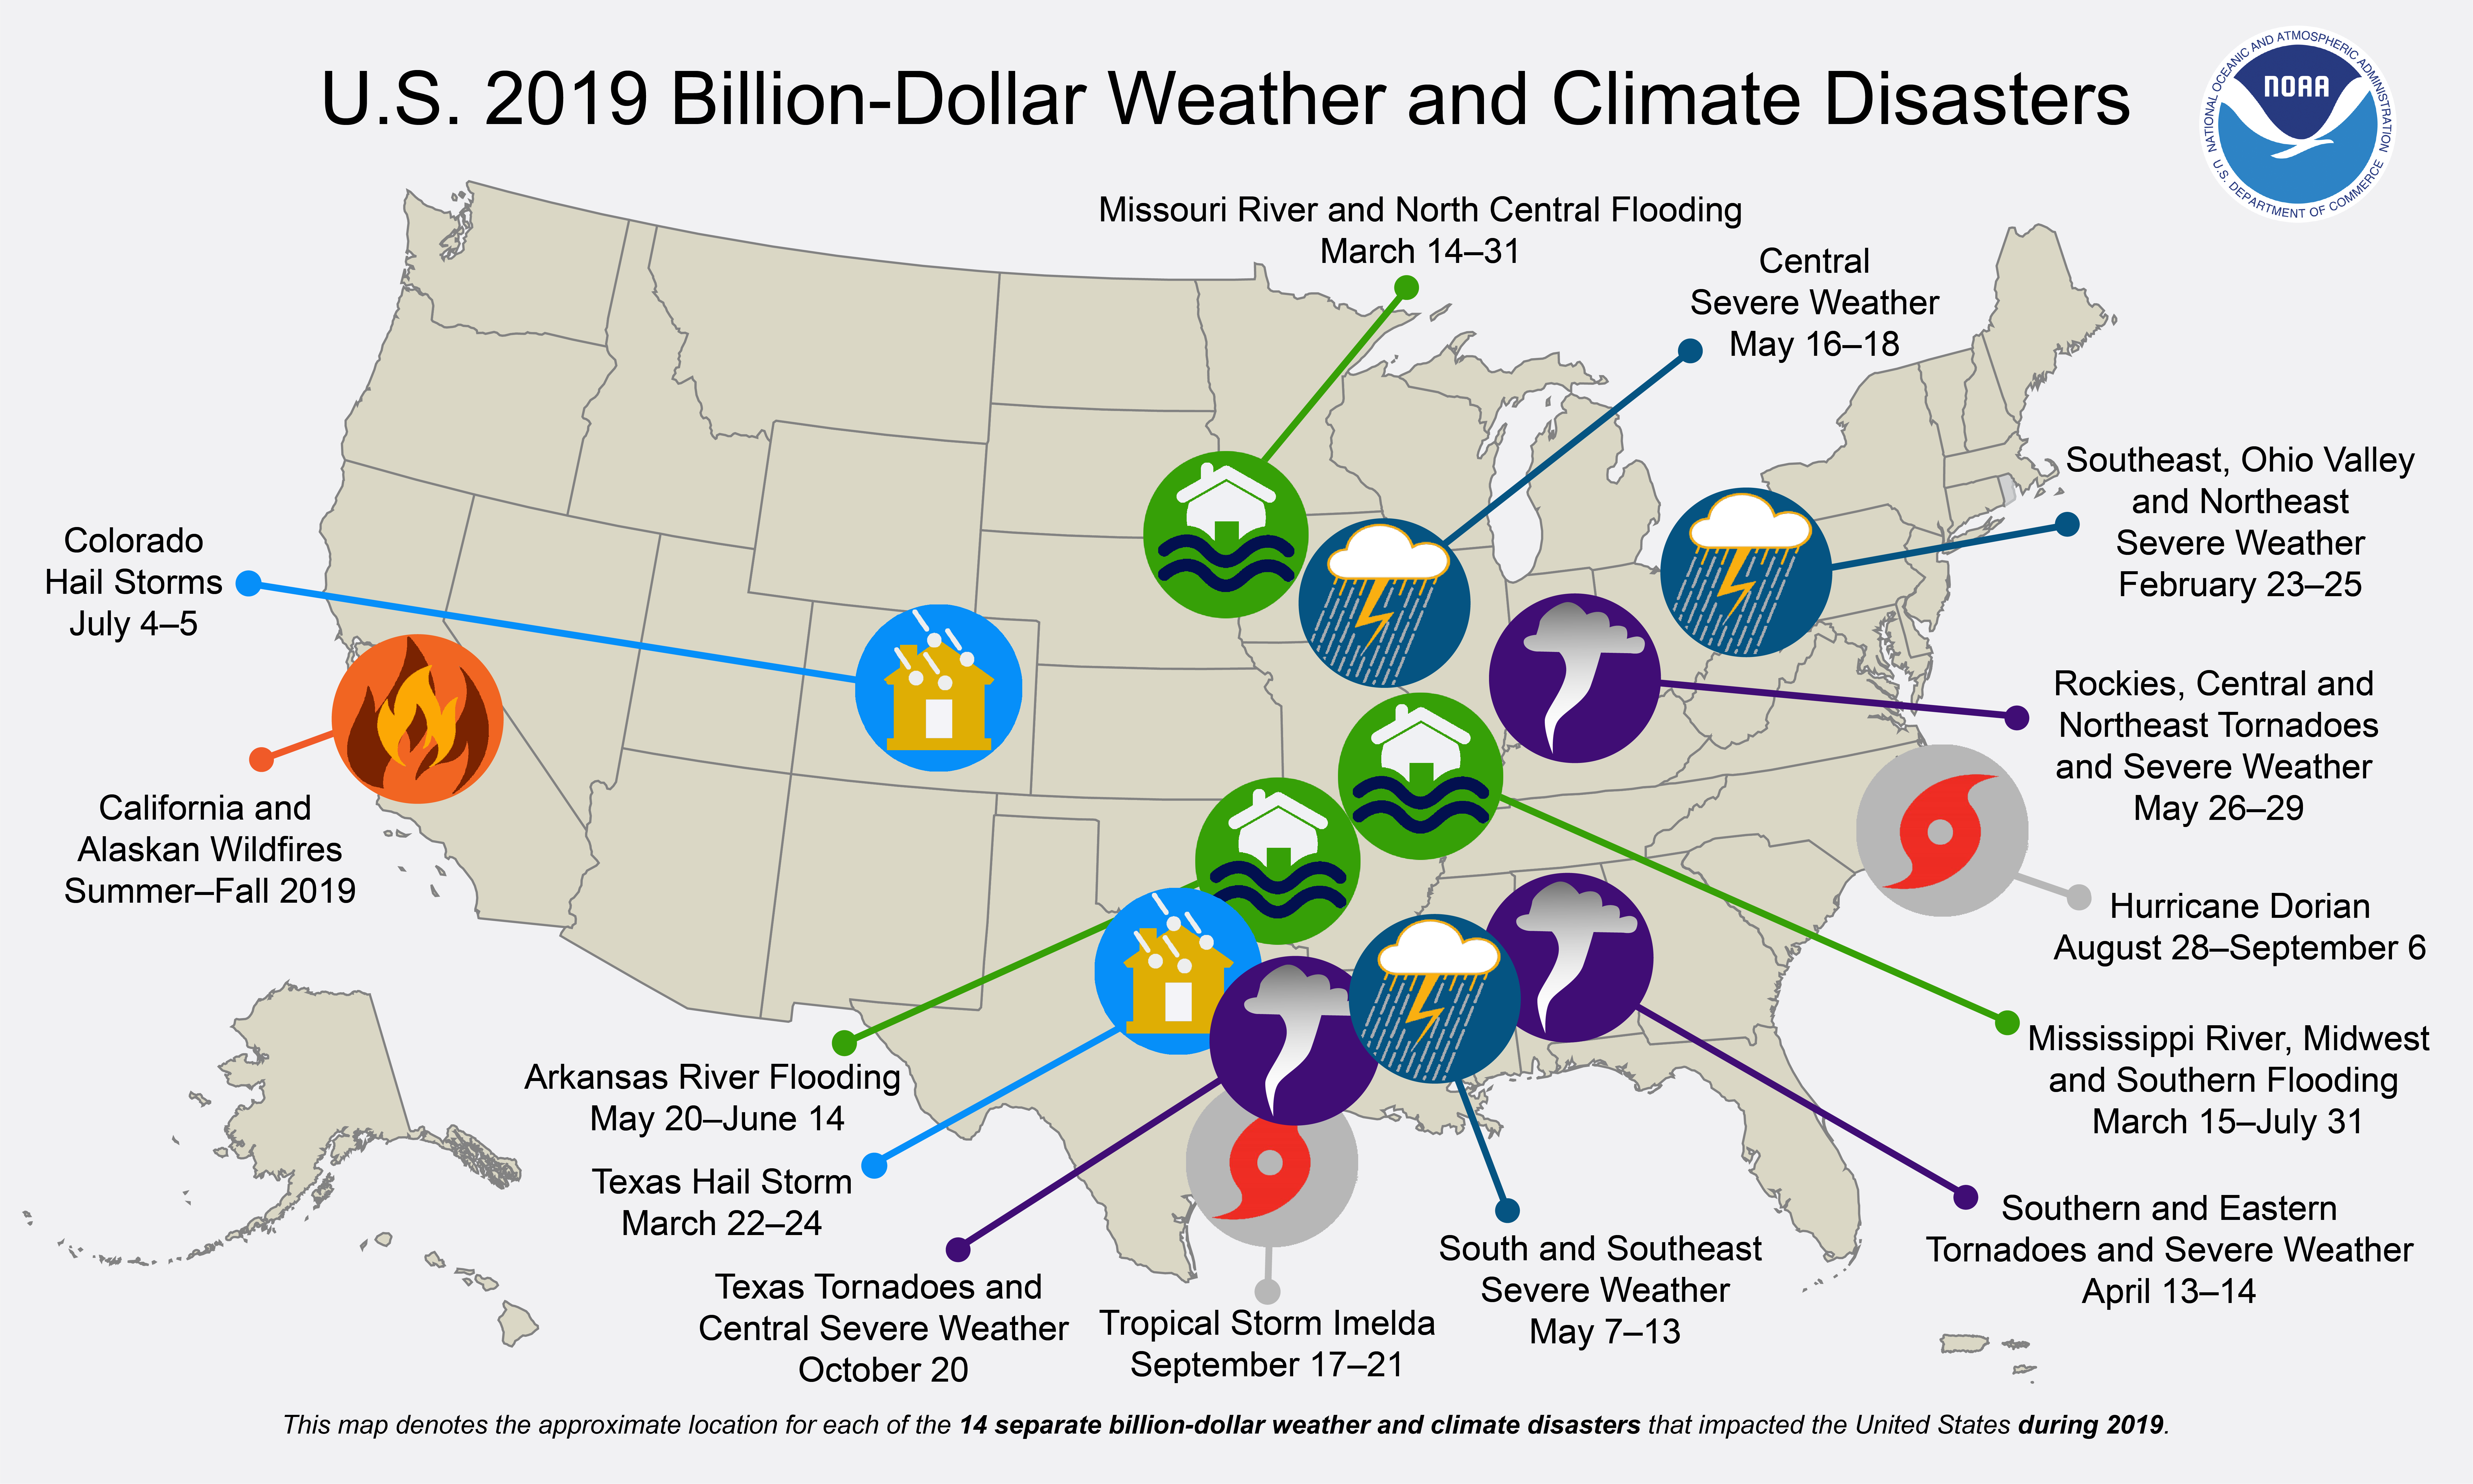 This U.S. map shows the locations of all 14 billion-dollar disasters that happened across the country in 2019.